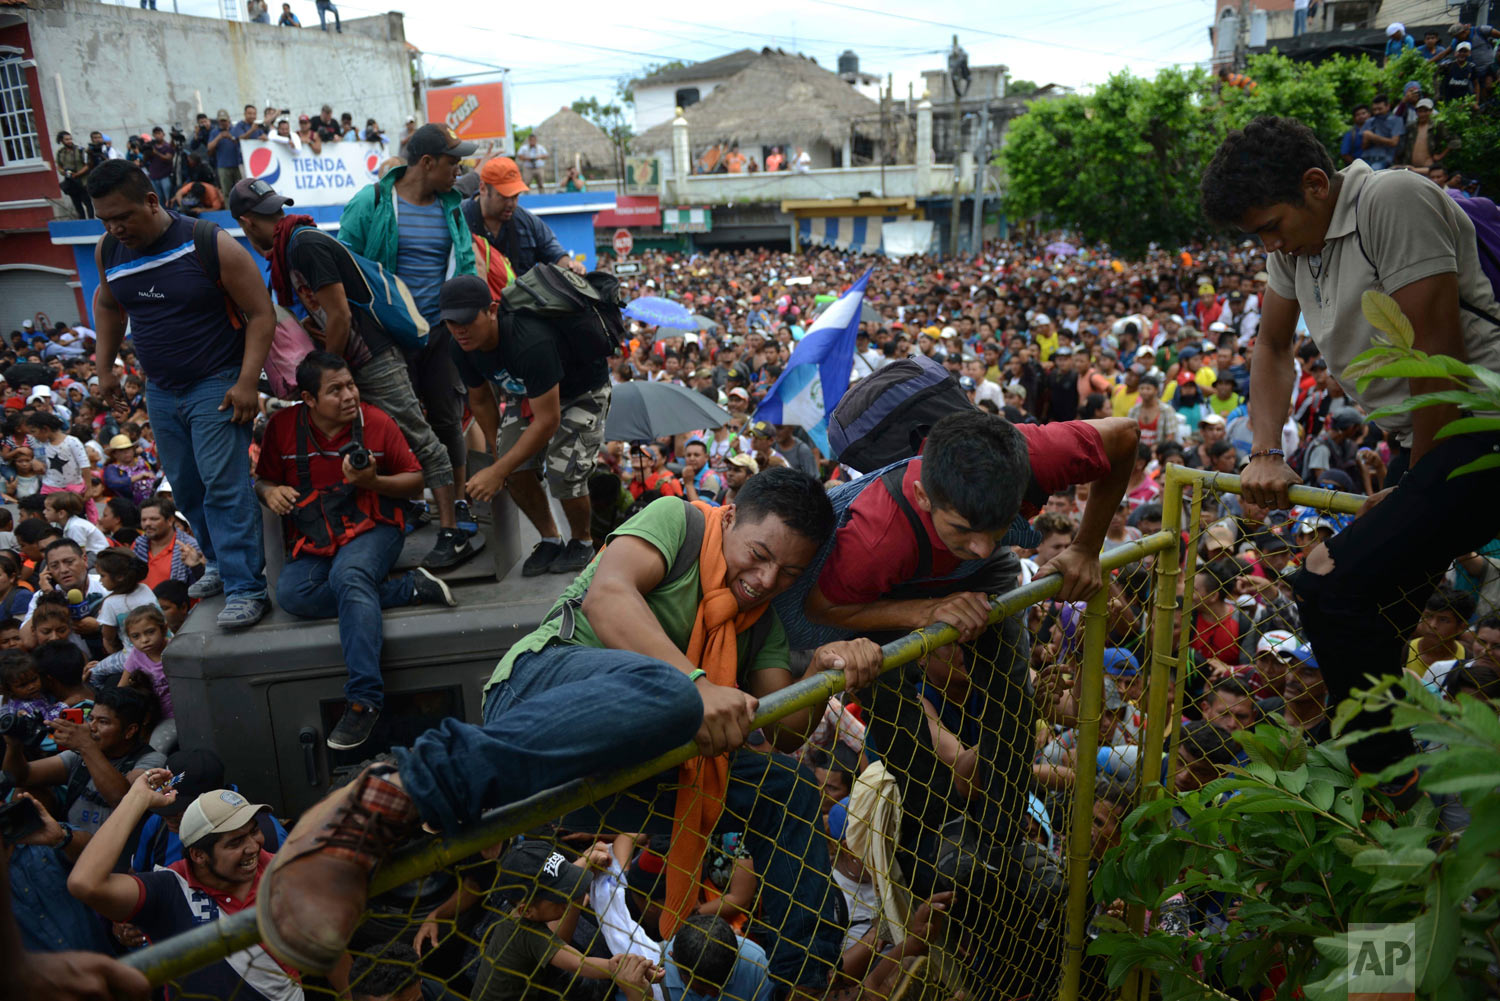  Thousands of Honduran migrants gather at a fence as some climb towards Mexico in Tecun Uman, Guatemala, Friday, Oct. 19, 2018. Migrants broke down the gates at the border crossing and began streaming toward a bridge into Mexico. After arriving at th